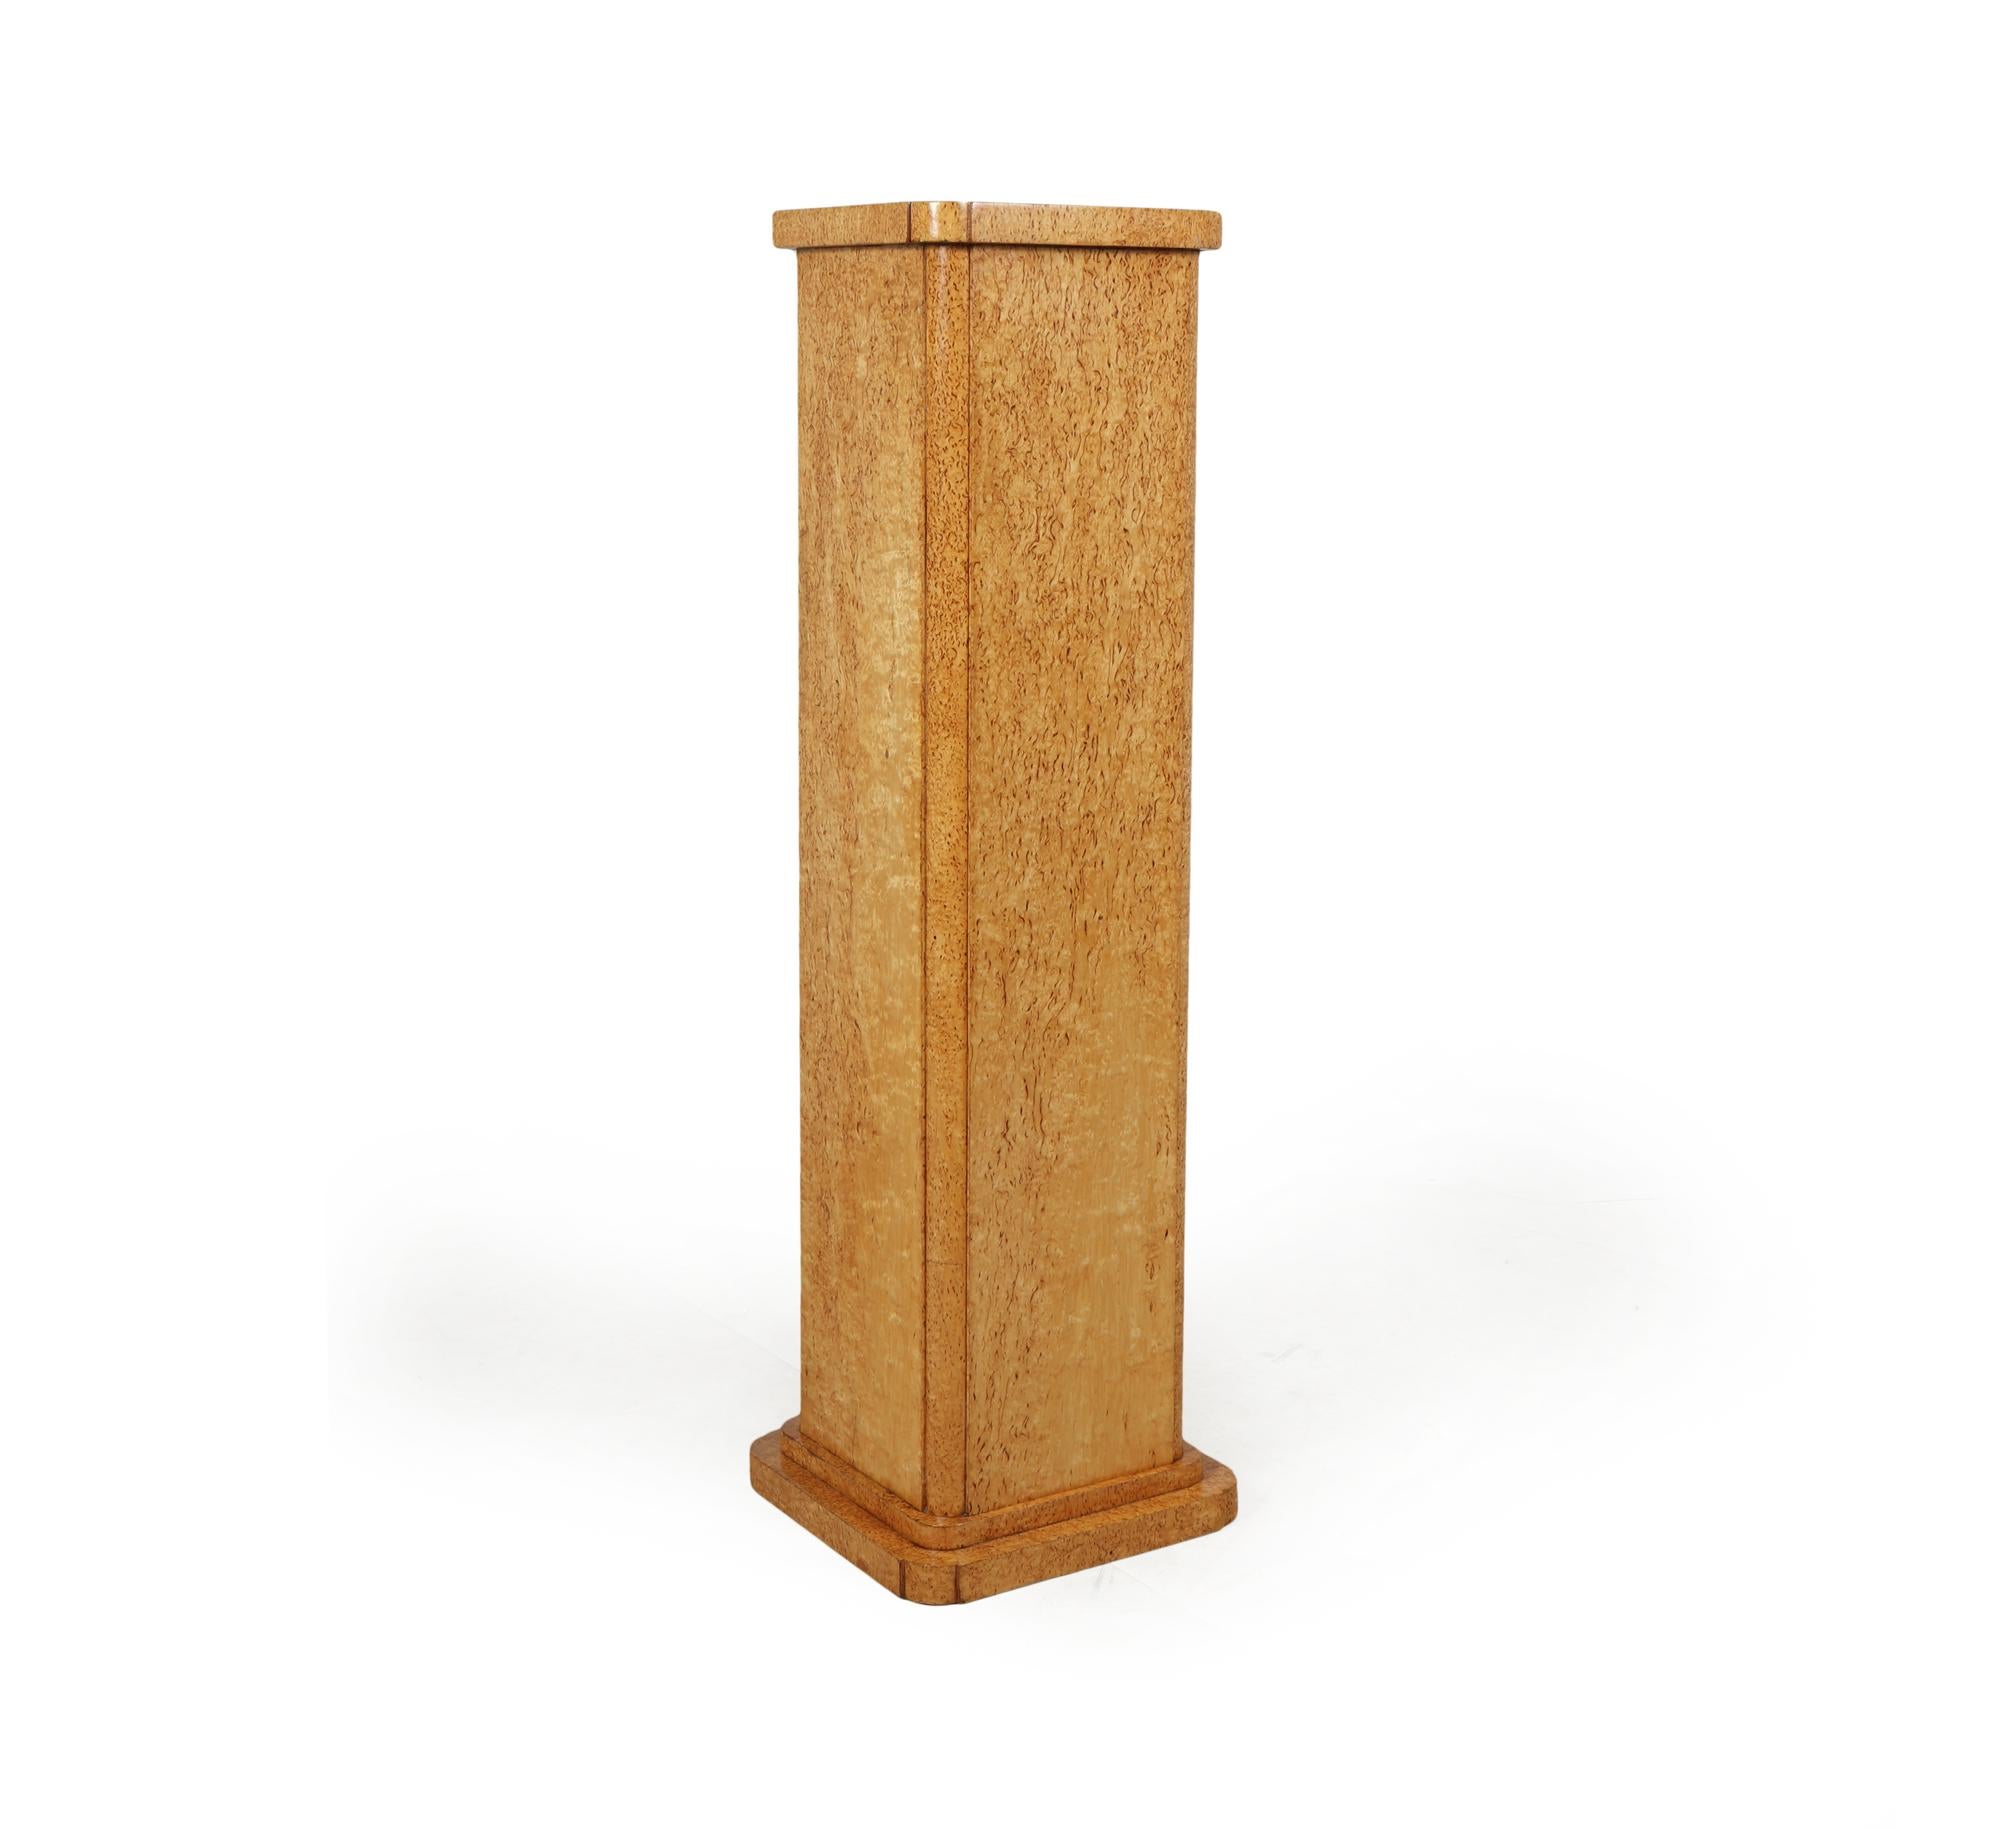 A fine quality Art Deco column or Bronze stand with stepped rounded corners and very highly figured karelian birch veneers, it is in excellent condition throughout having been correctly restored and fully polished by Hand

Age: 1925

Style: Art